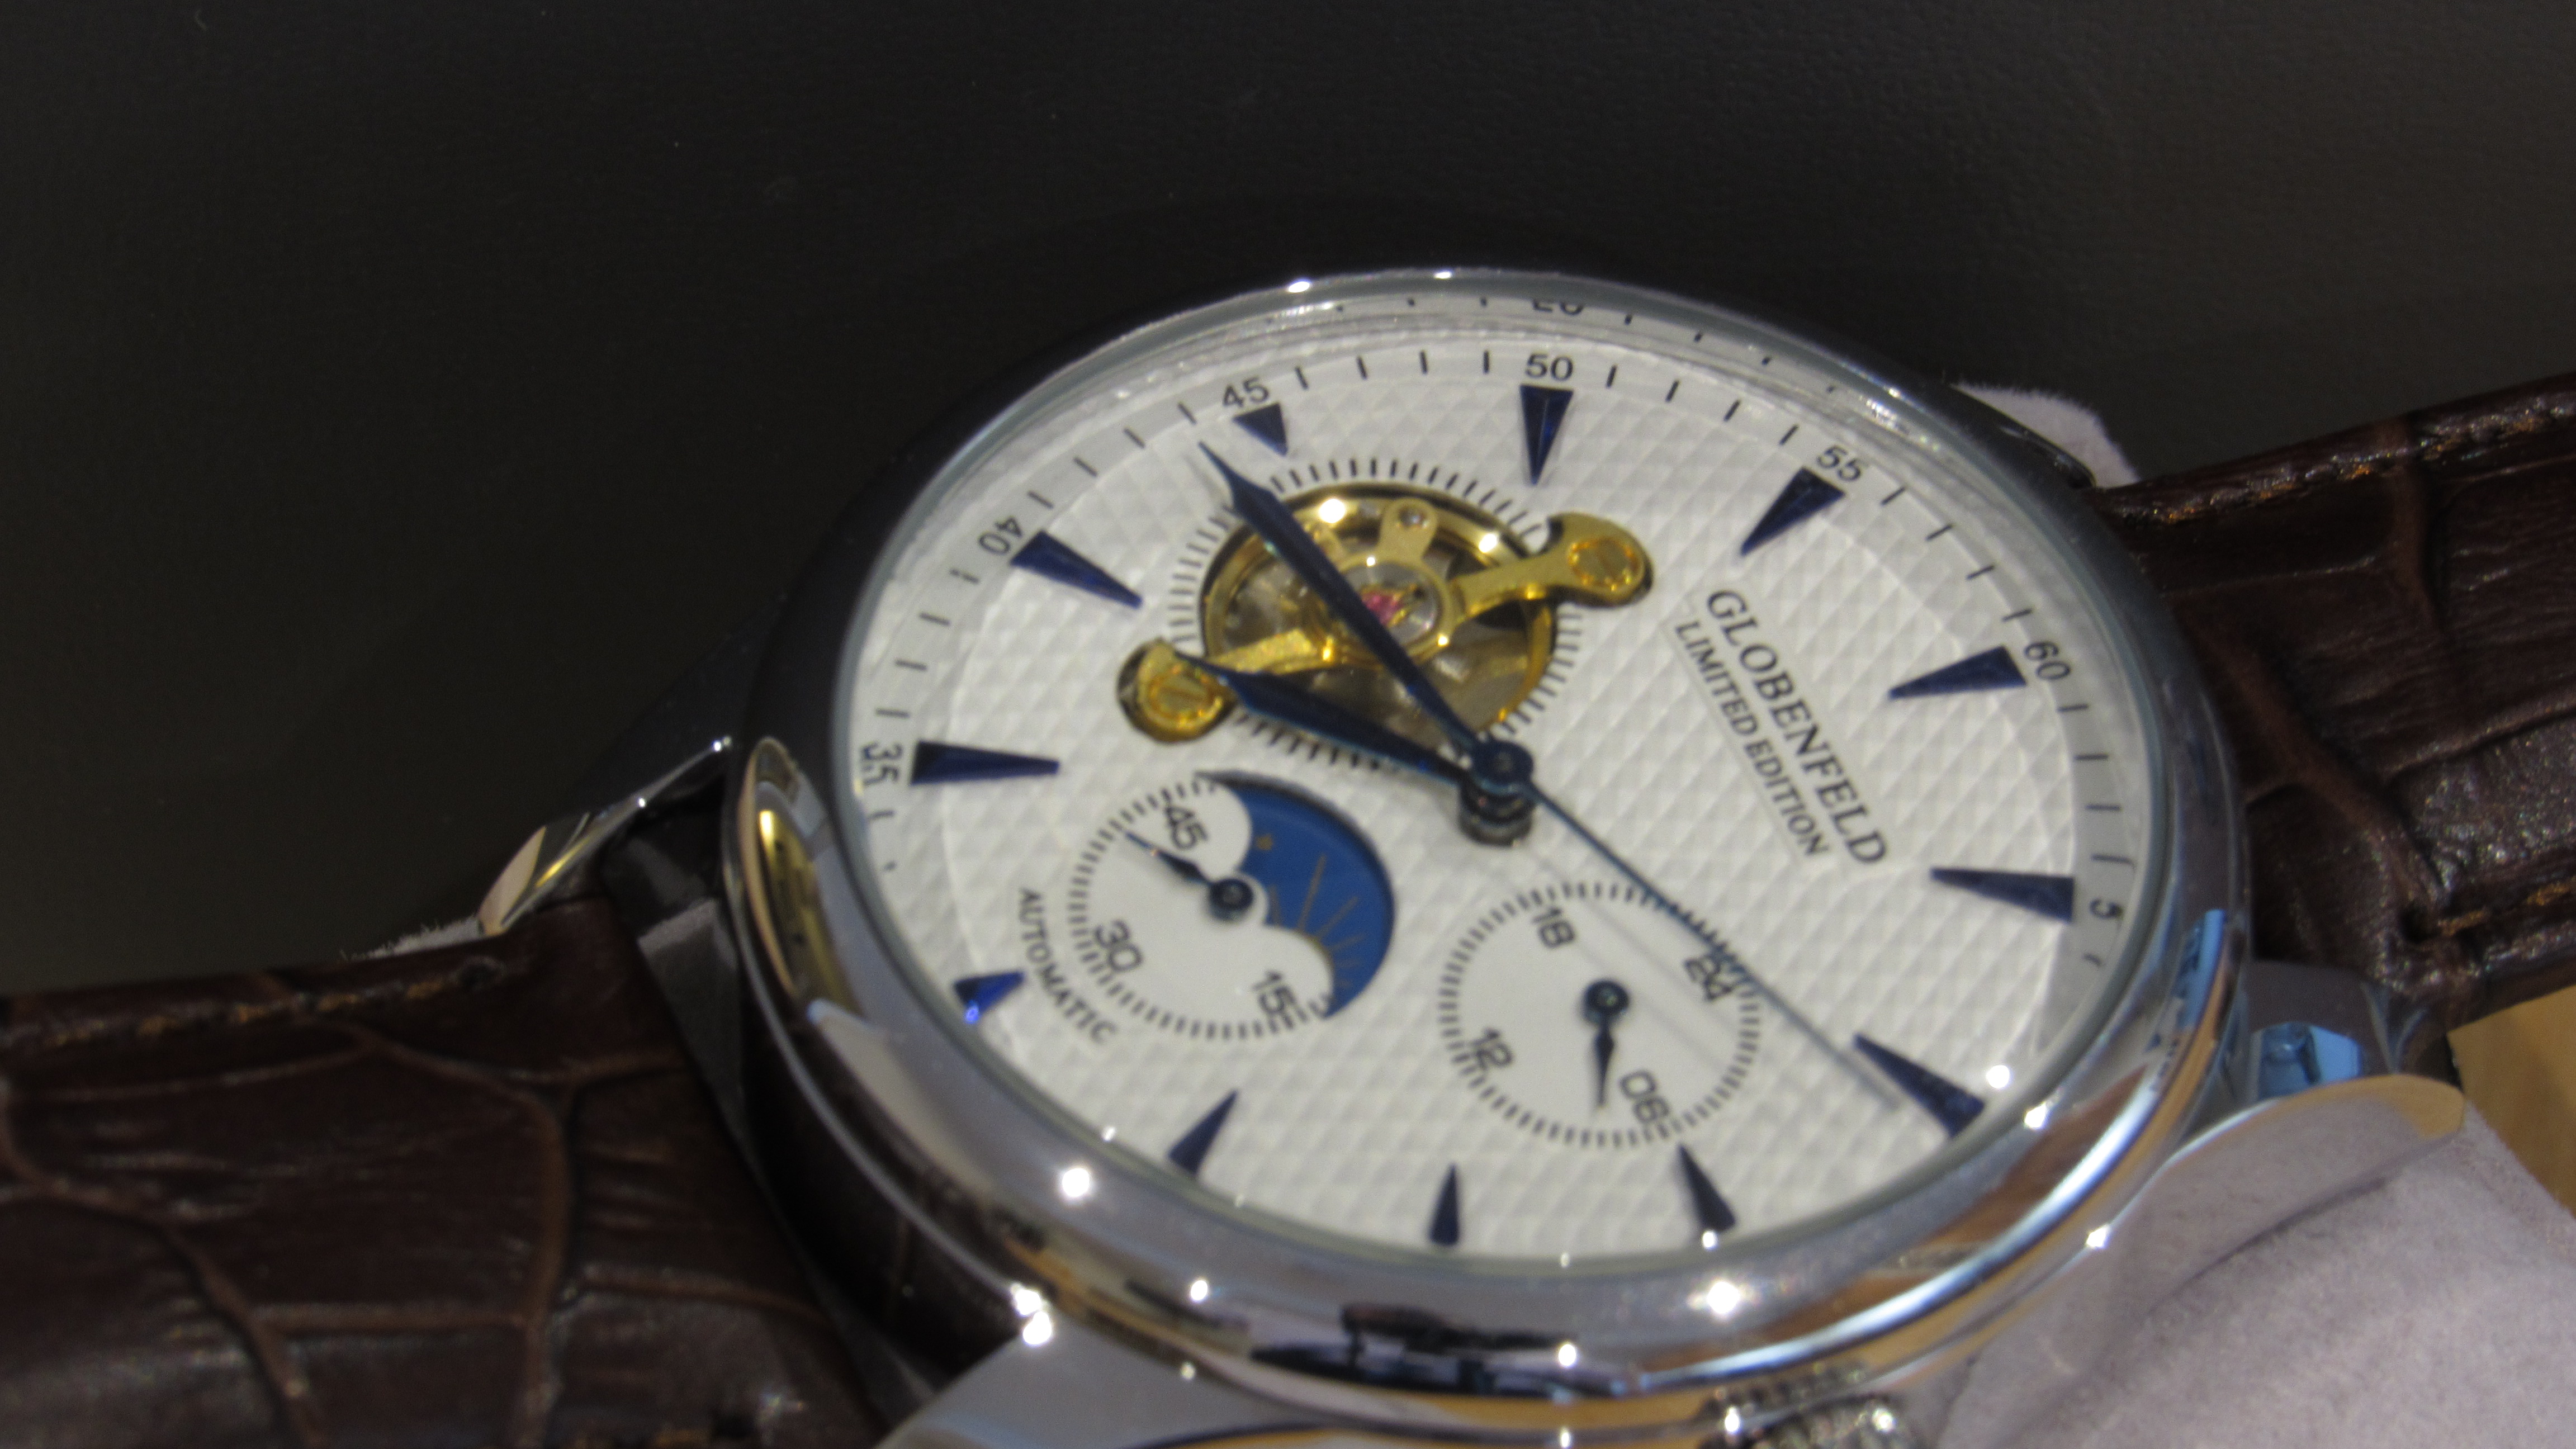 Watch review - Globenfeld Automatic 